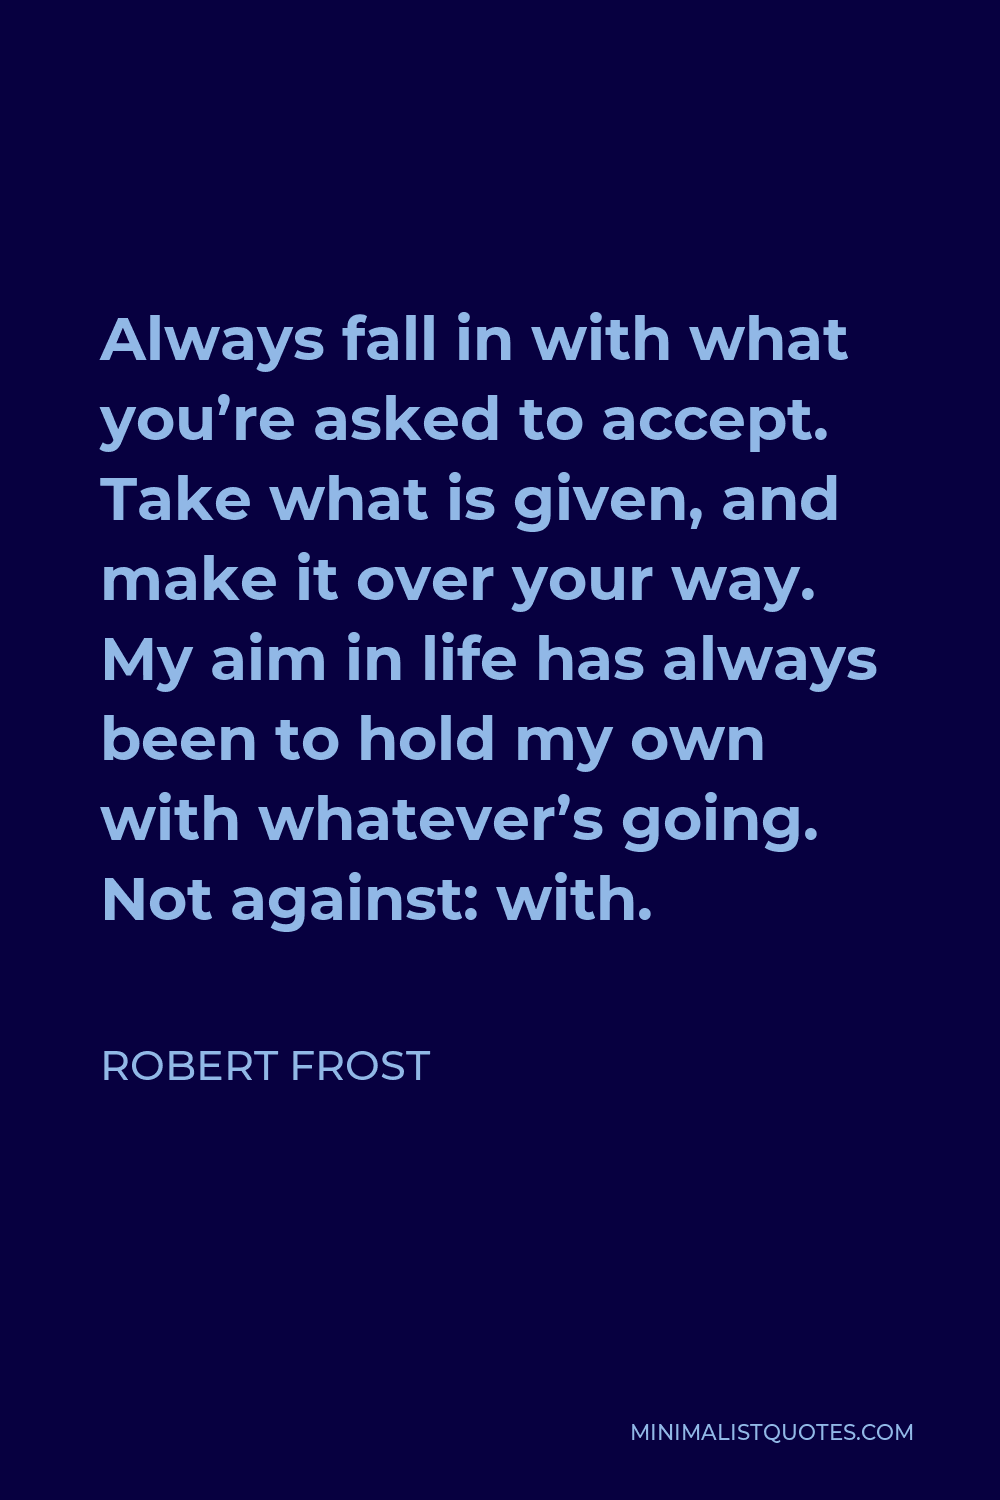 Robert Frost Quote - Always fall in with what you’re asked to accept. Take what is given, and make it over your way. My aim in life has always been to hold my own with whatever’s going. Not against: with.